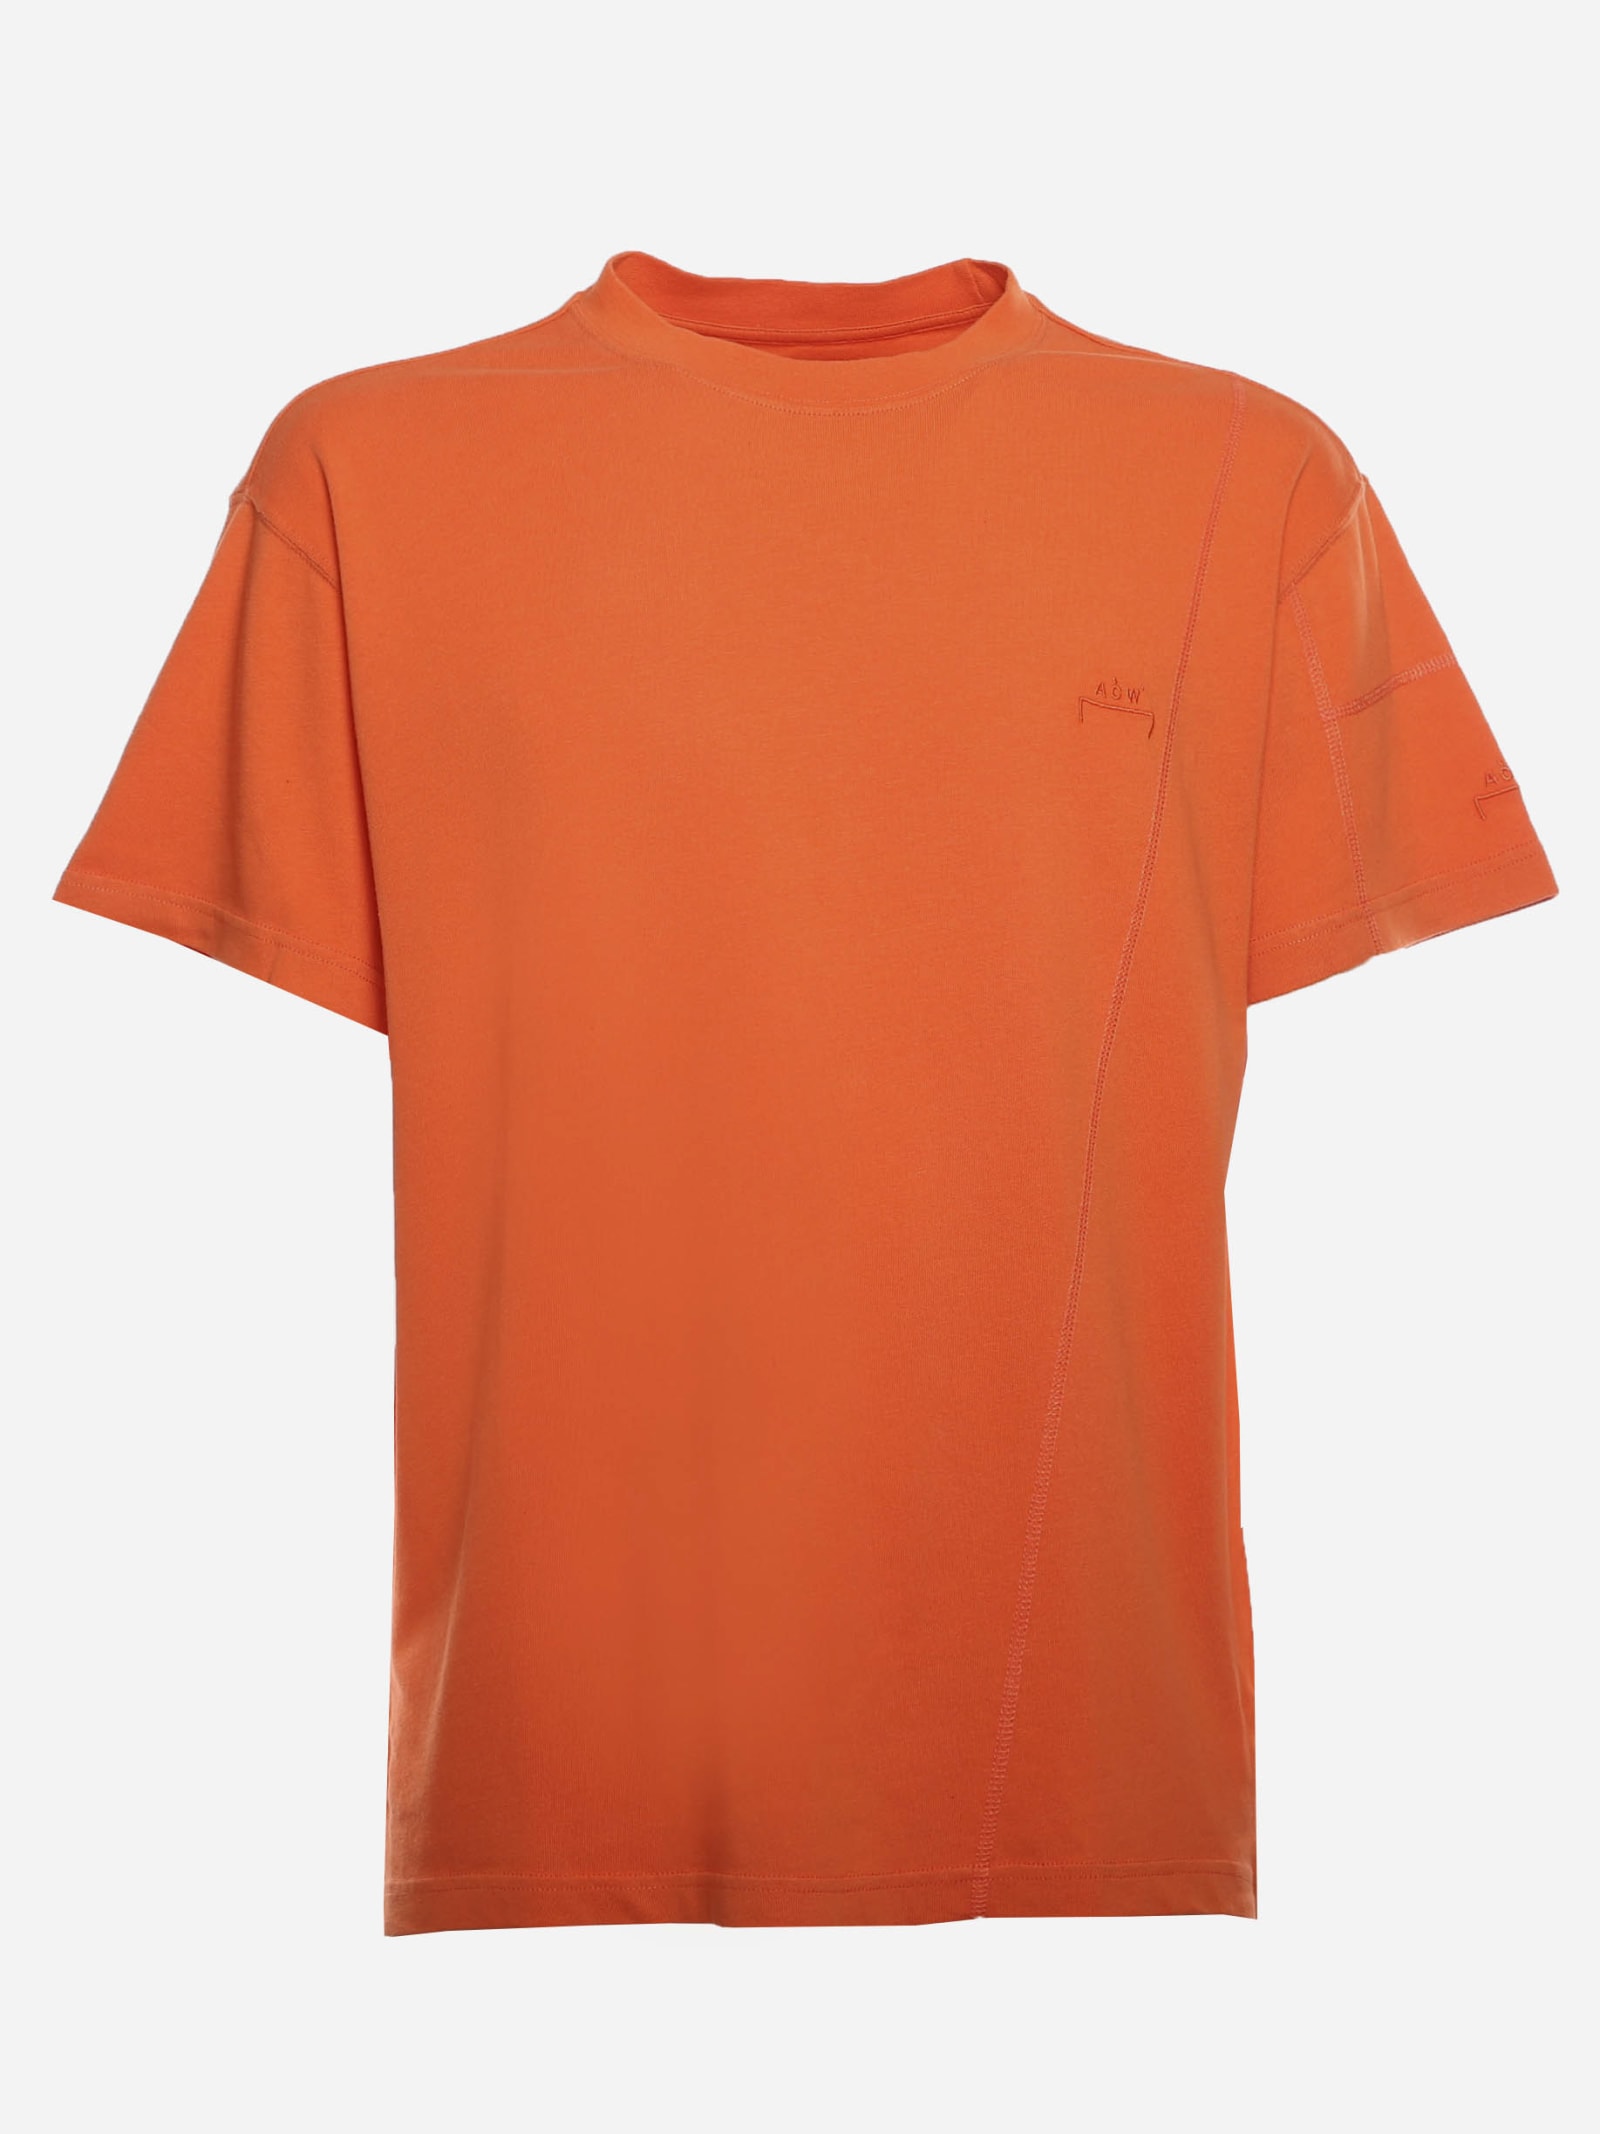 A-COLD-WALL Cotton T-shirt With Tone-on-tone Logo Embroidery